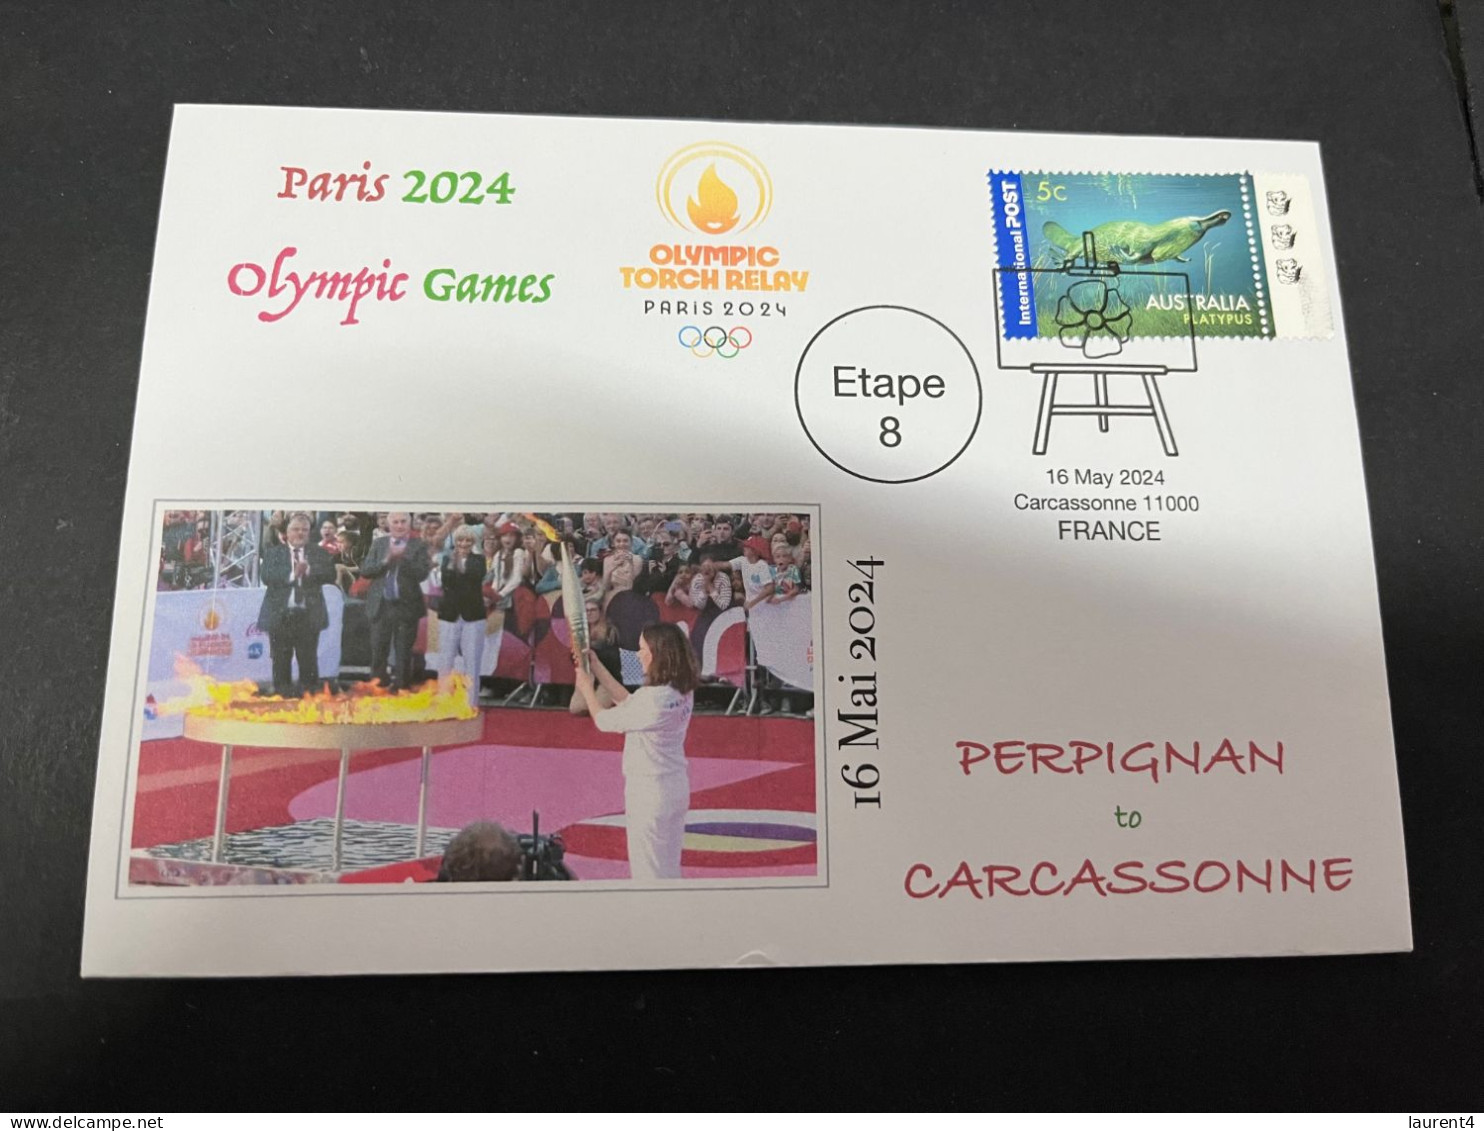 17-5-2024 (5 Z 17) Paris Olympic Games 2024 - Torch Relay (Etape 8) In Carcassonne (16-5-2024) With OZ Stamp - Verano 2024 : París